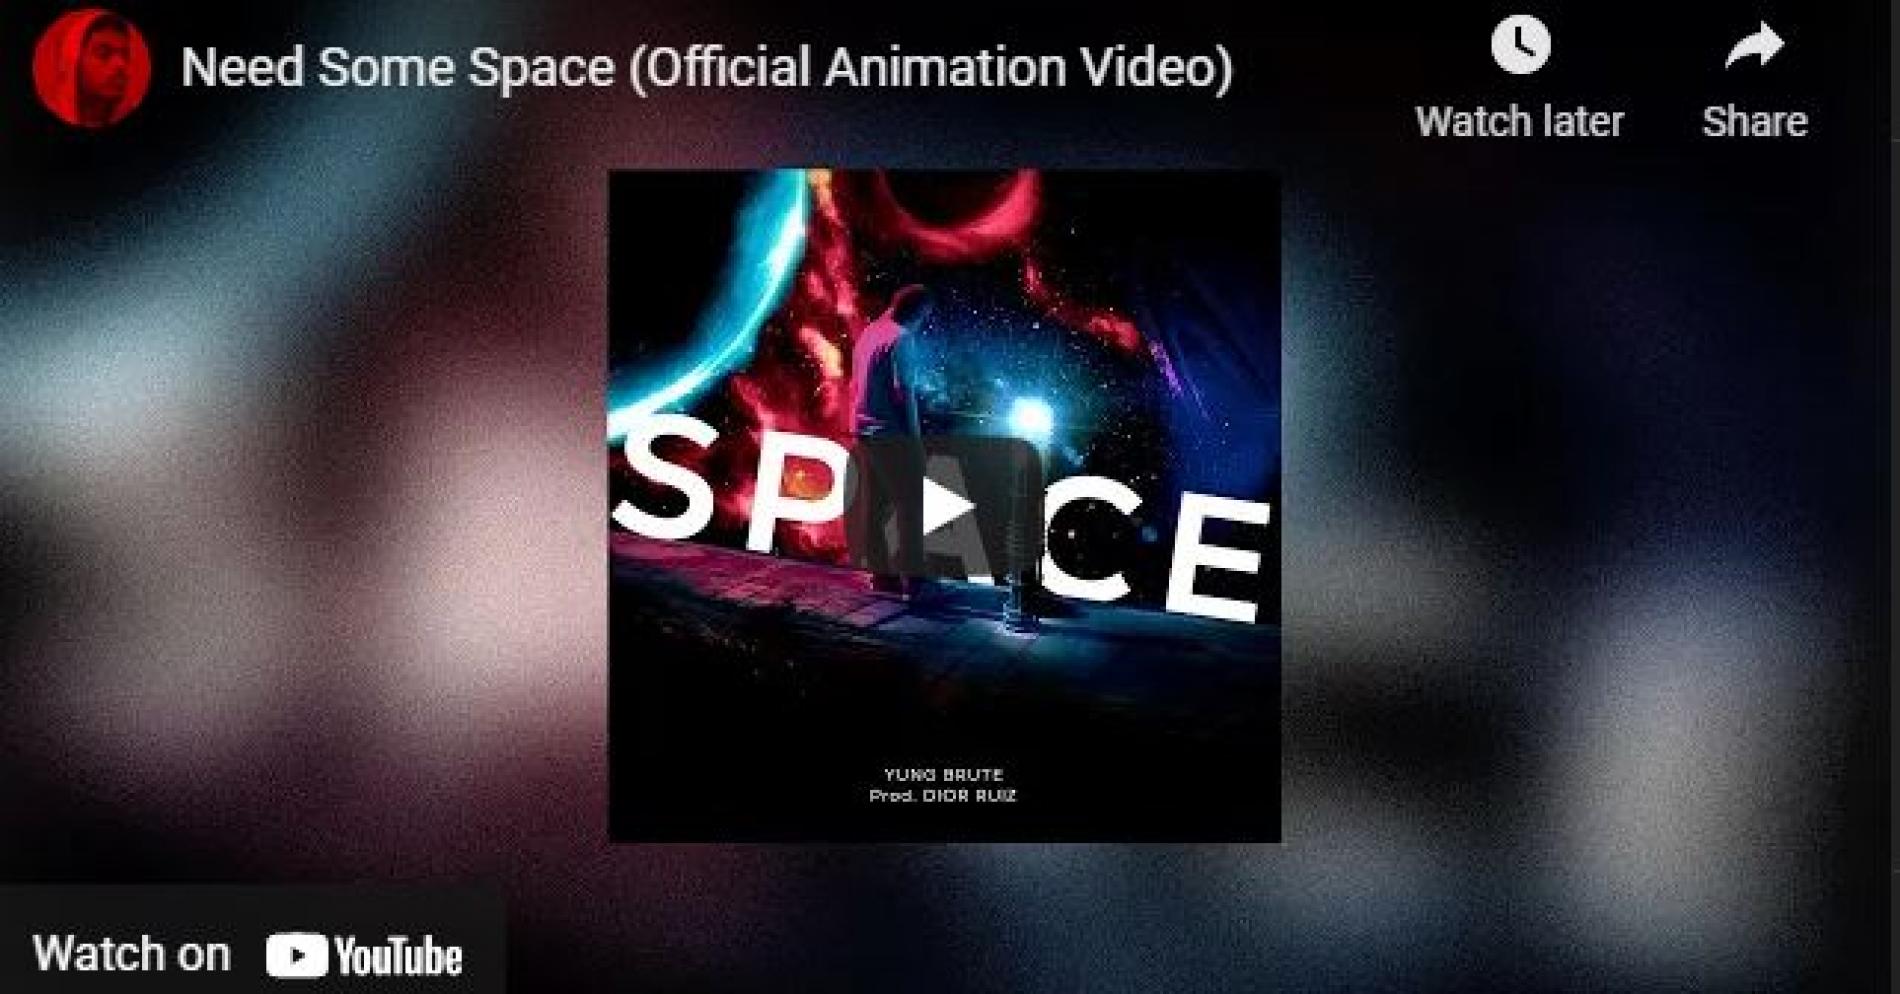 New Music : Yung Brute : Need Some Space (Official Animation Video)